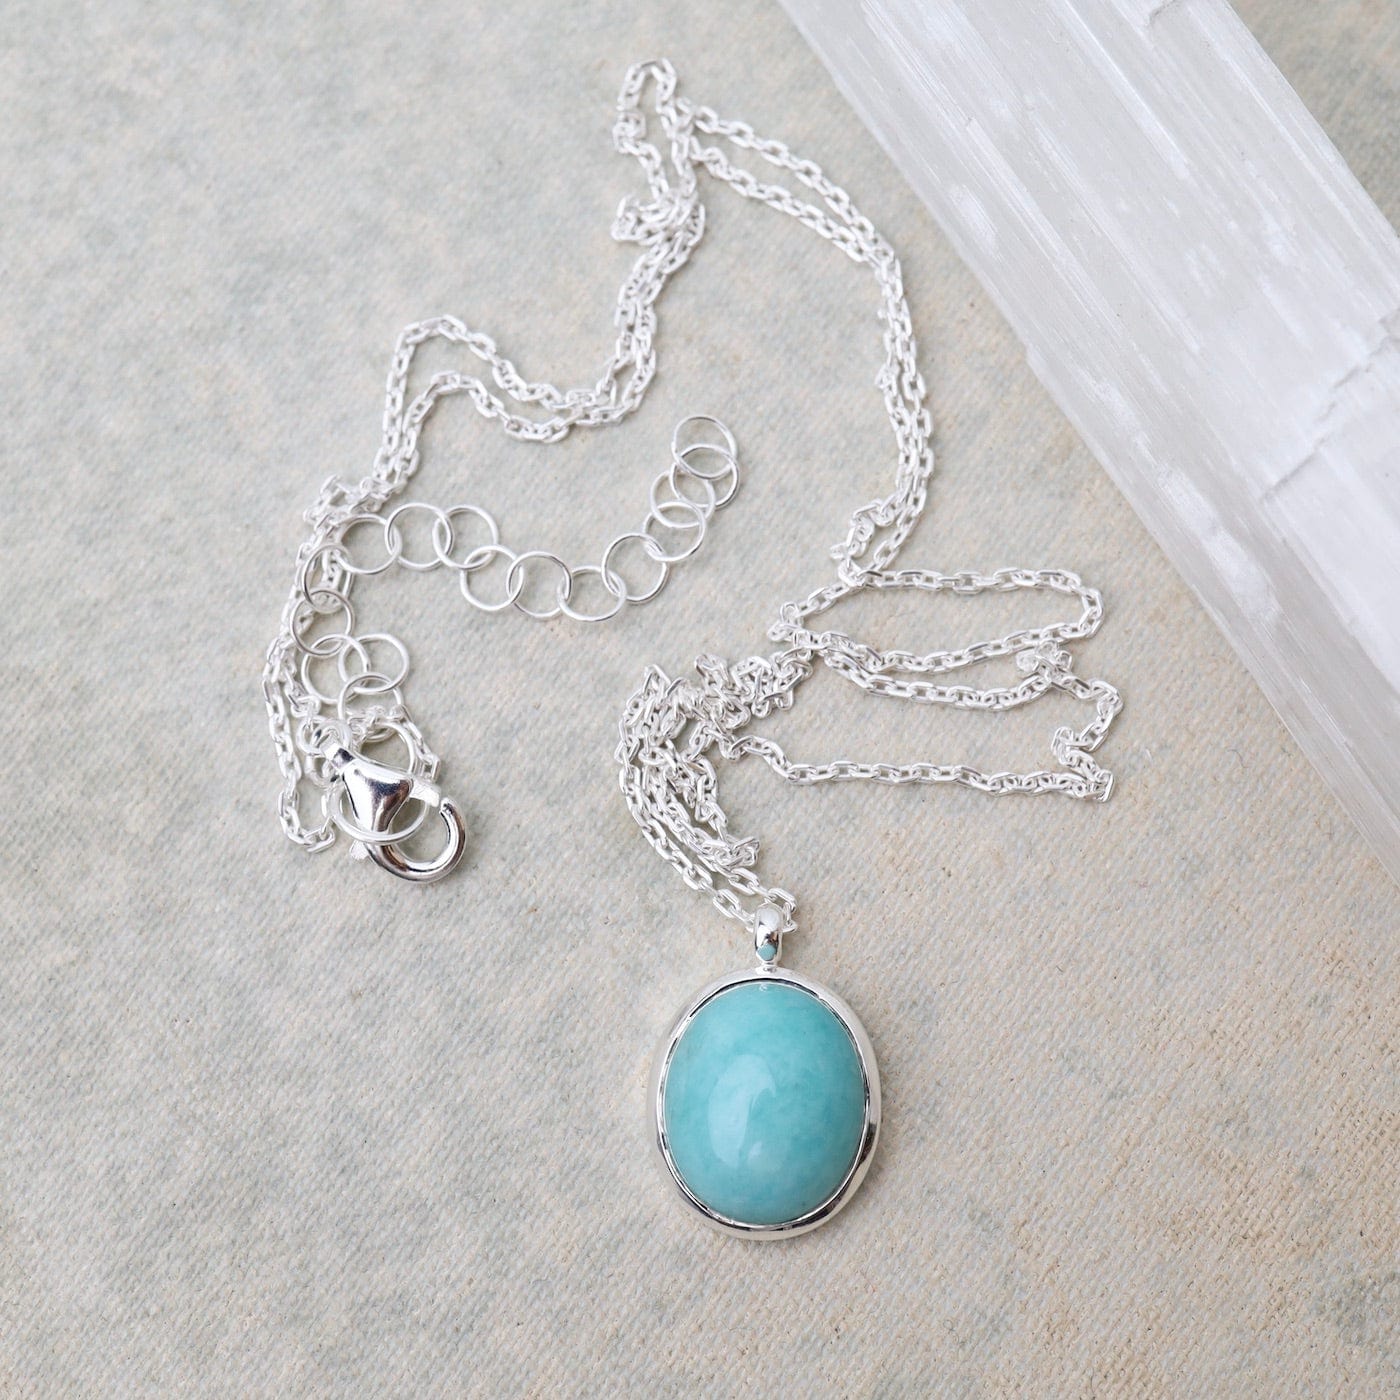 NKL Oval Cabochon Amazonite Necklace - Sterling Silver